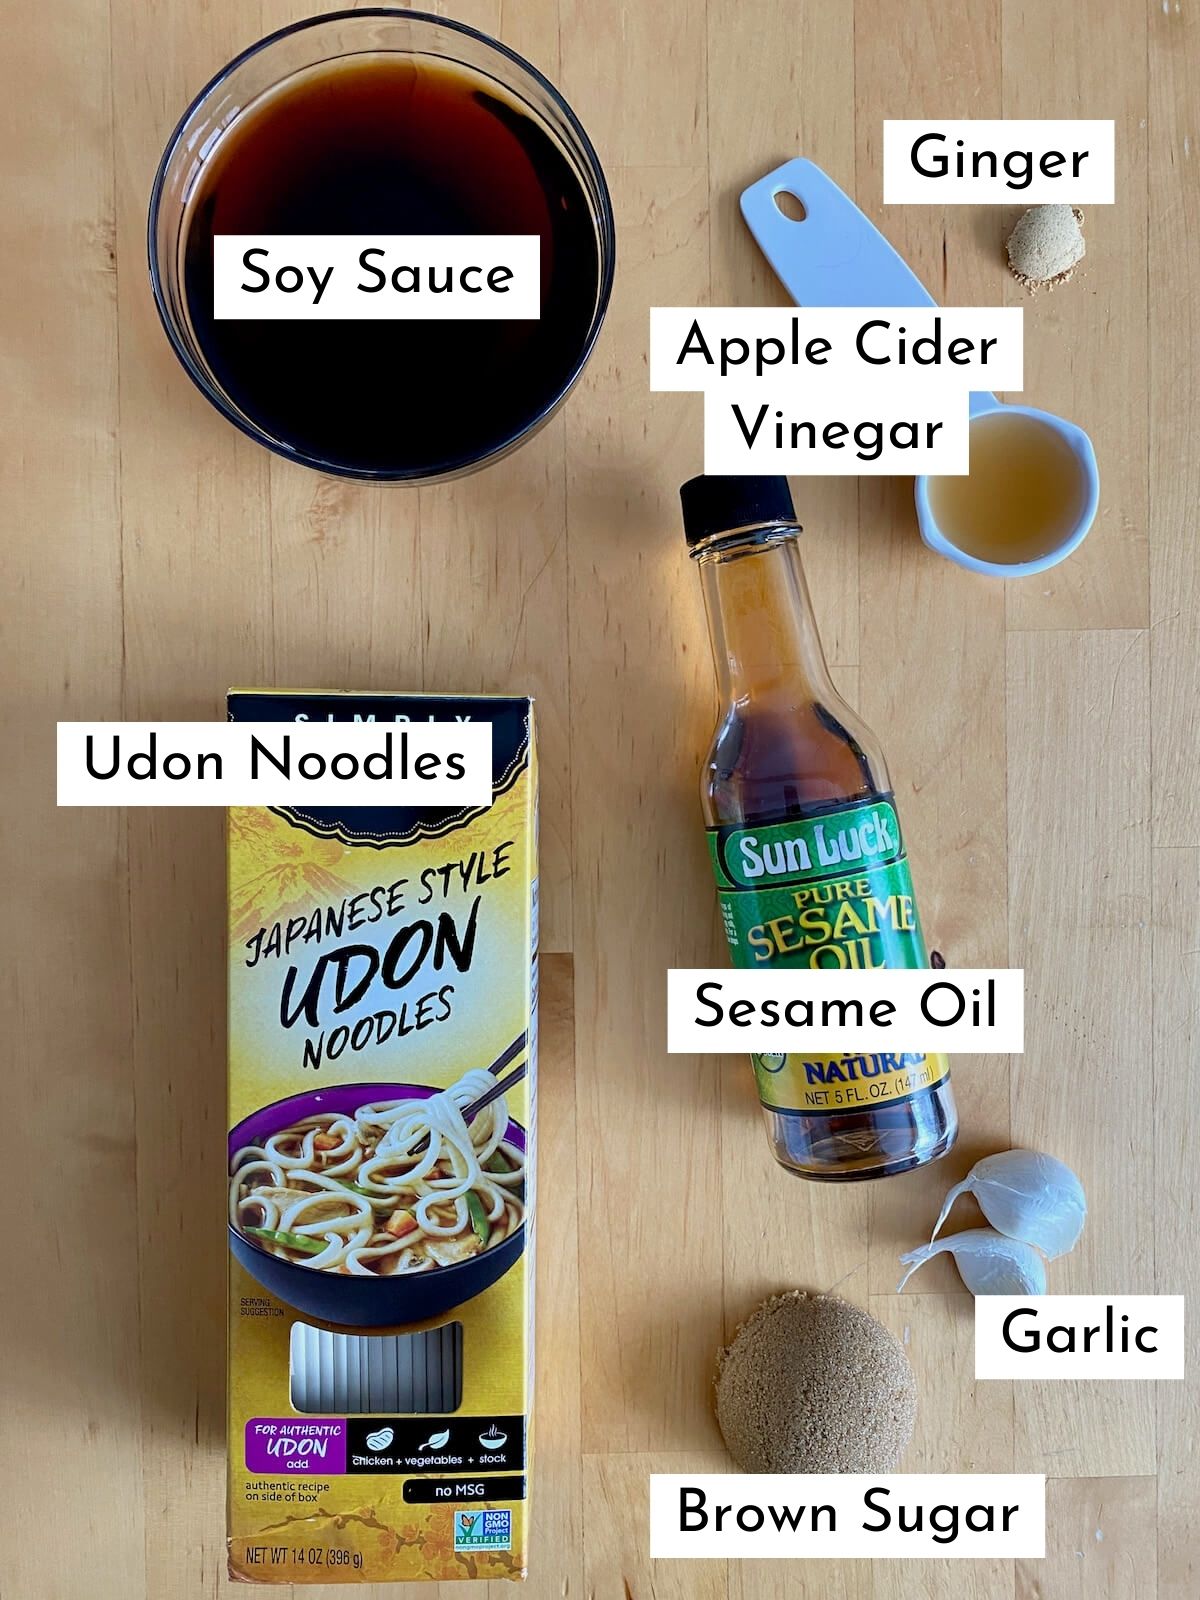 The ingredients to make teriyaki udon noodles. Each ingredient is labeled with text. They include soy sauce, apple cider vinegar, ginger, udon noodles, sesame oil, garlic, and brown sugar.